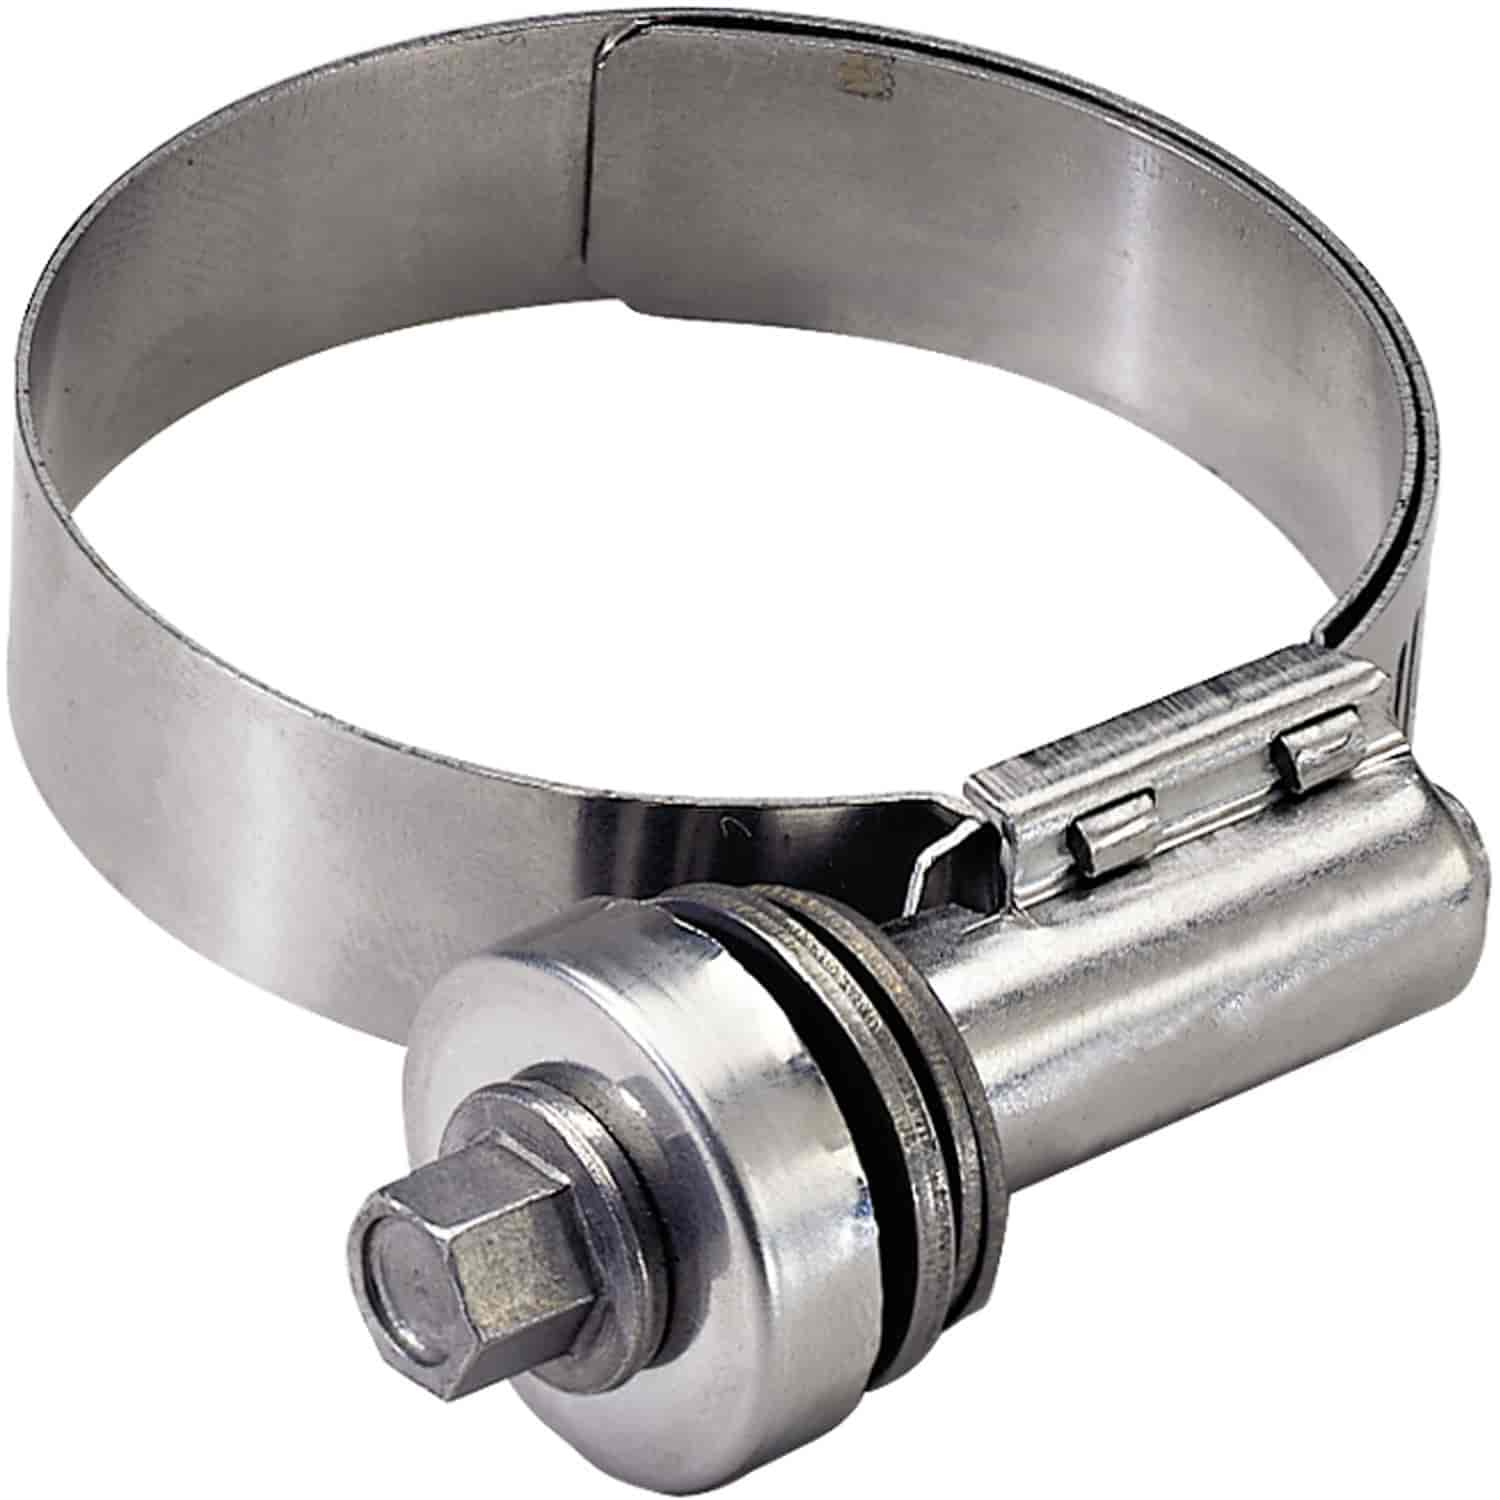 Green Stripe Constant Tension Hose Clamp [3.500 in. to 2.523 in. Outside Diameter]